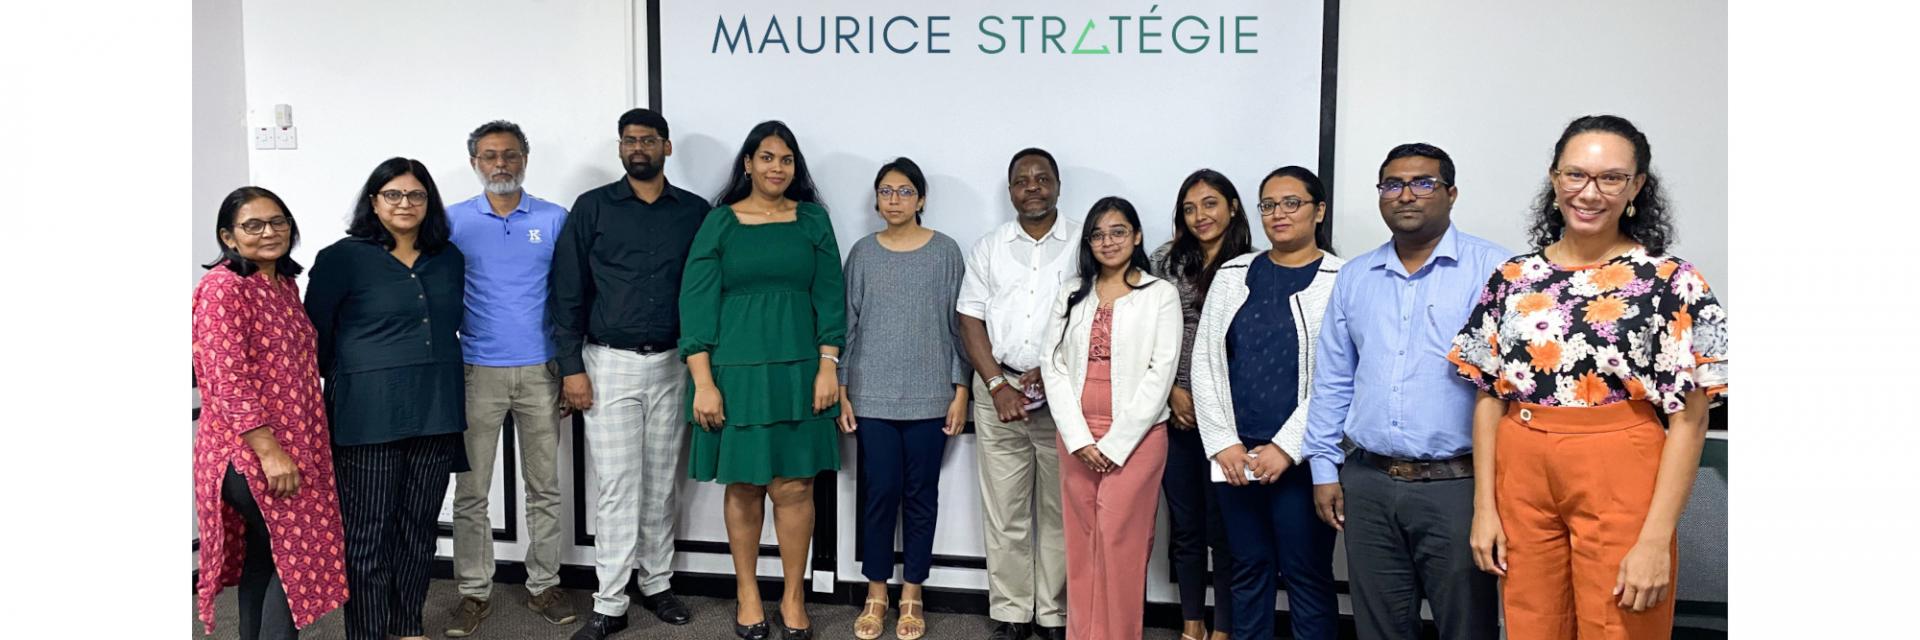 Mauritius’ researchers and policy makers undergo training on ECA’s forecasting and policy simulation tool